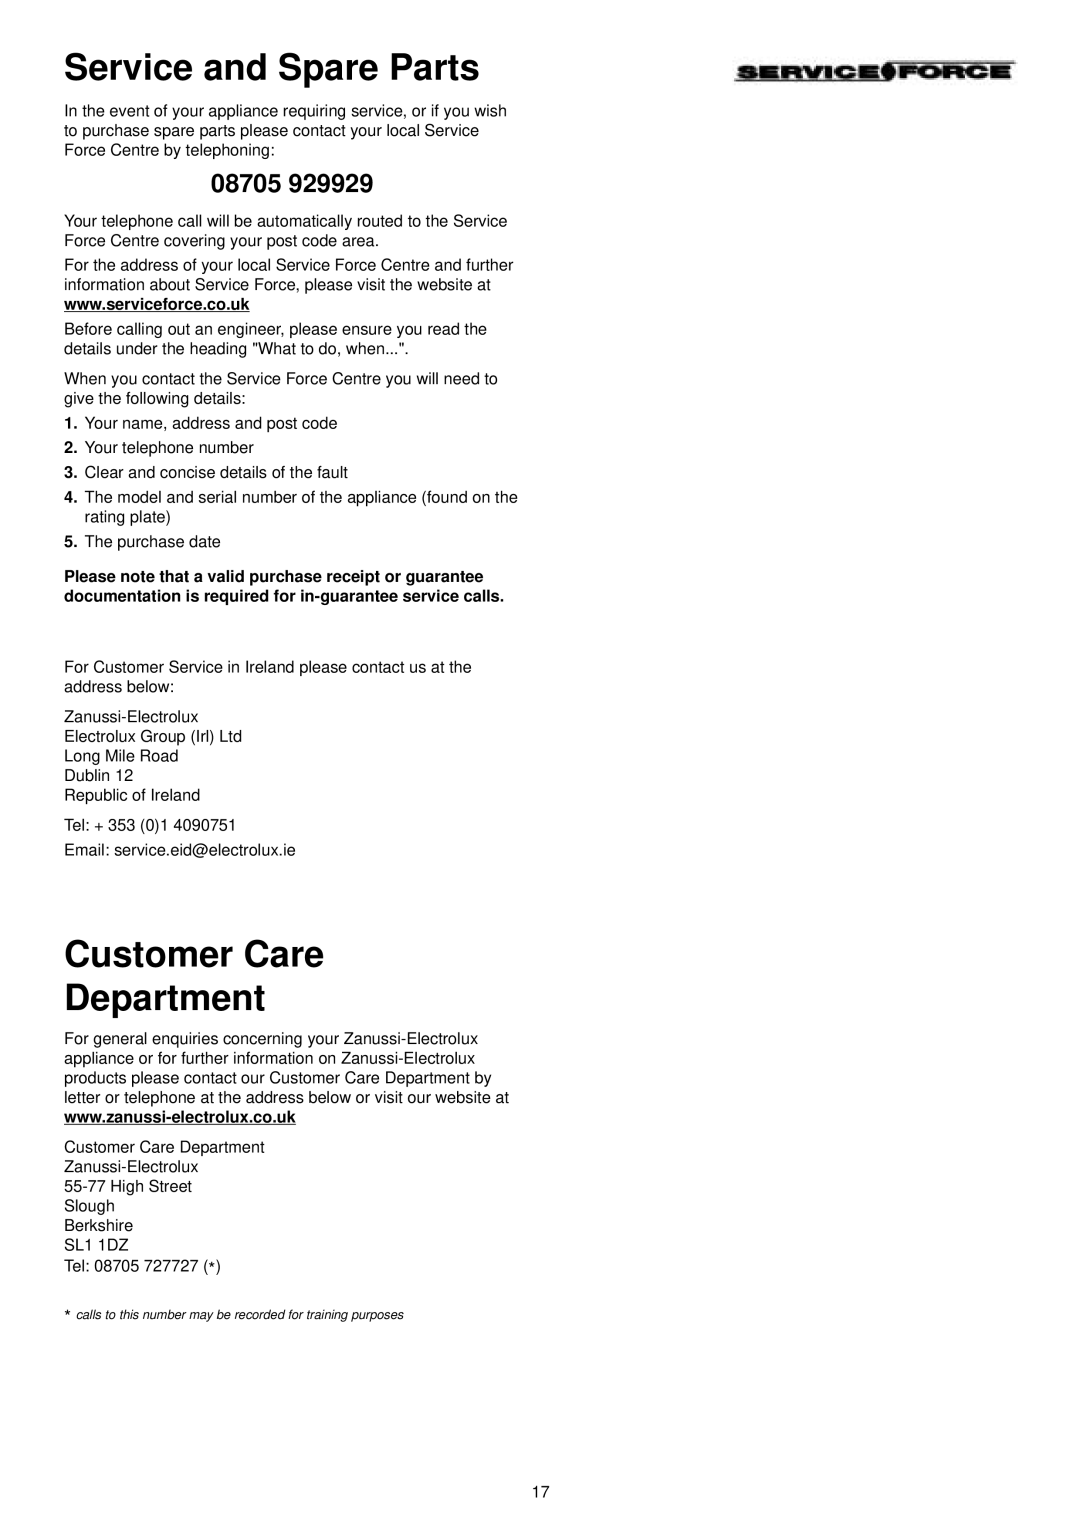 Zanussi ZSF 4123 S manual Service and Spare Parts, Customer Care Department, 08705 